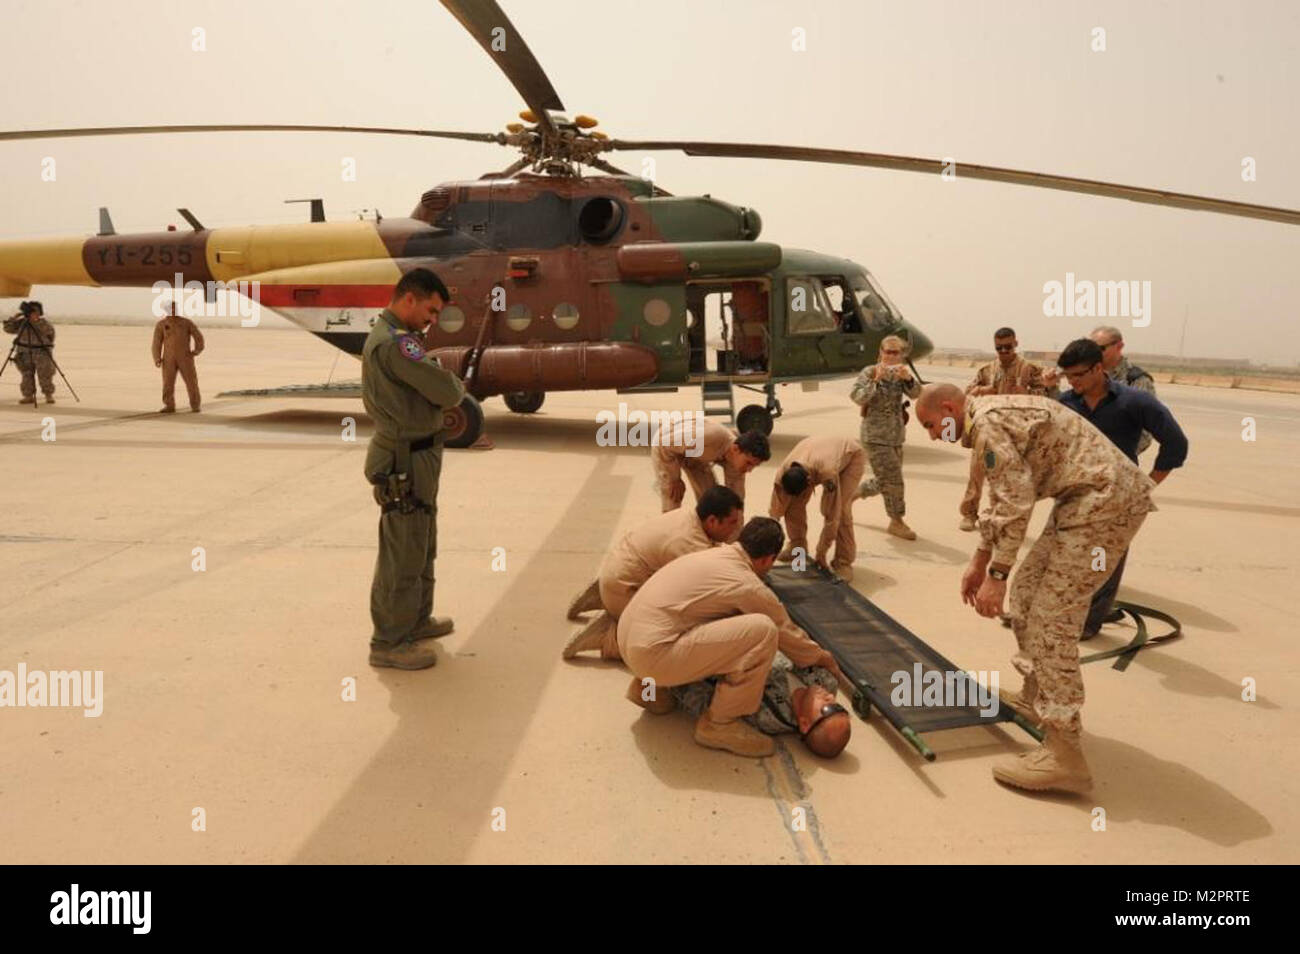 IRAQ, BIAP. Joint MEdevac training at BIAP between the Iraqi Air Force 2nd and 4th Squadron (UH-1, Mi17) crewmembers with 171 GSAB's C Co 3-126 Medevacs crew, and a A Co UH-60 Blackhawk crew flew to BIAP where the Iraqi's trained themselves Medevac procedures, and the US demonstrated to Iraqi's their Medevac equipment on the 'M' model UH-60 MEDEVAC helicopter.  US Airforce personnel facilitated the training at BIAP and participated in the training as well. (Photos by SPC Michael Uribe, 171 GSAB HHC Co.) Contact Michael@imageacquisitions.com Iraqi medevac training by Georgia National Guard Stock Photo